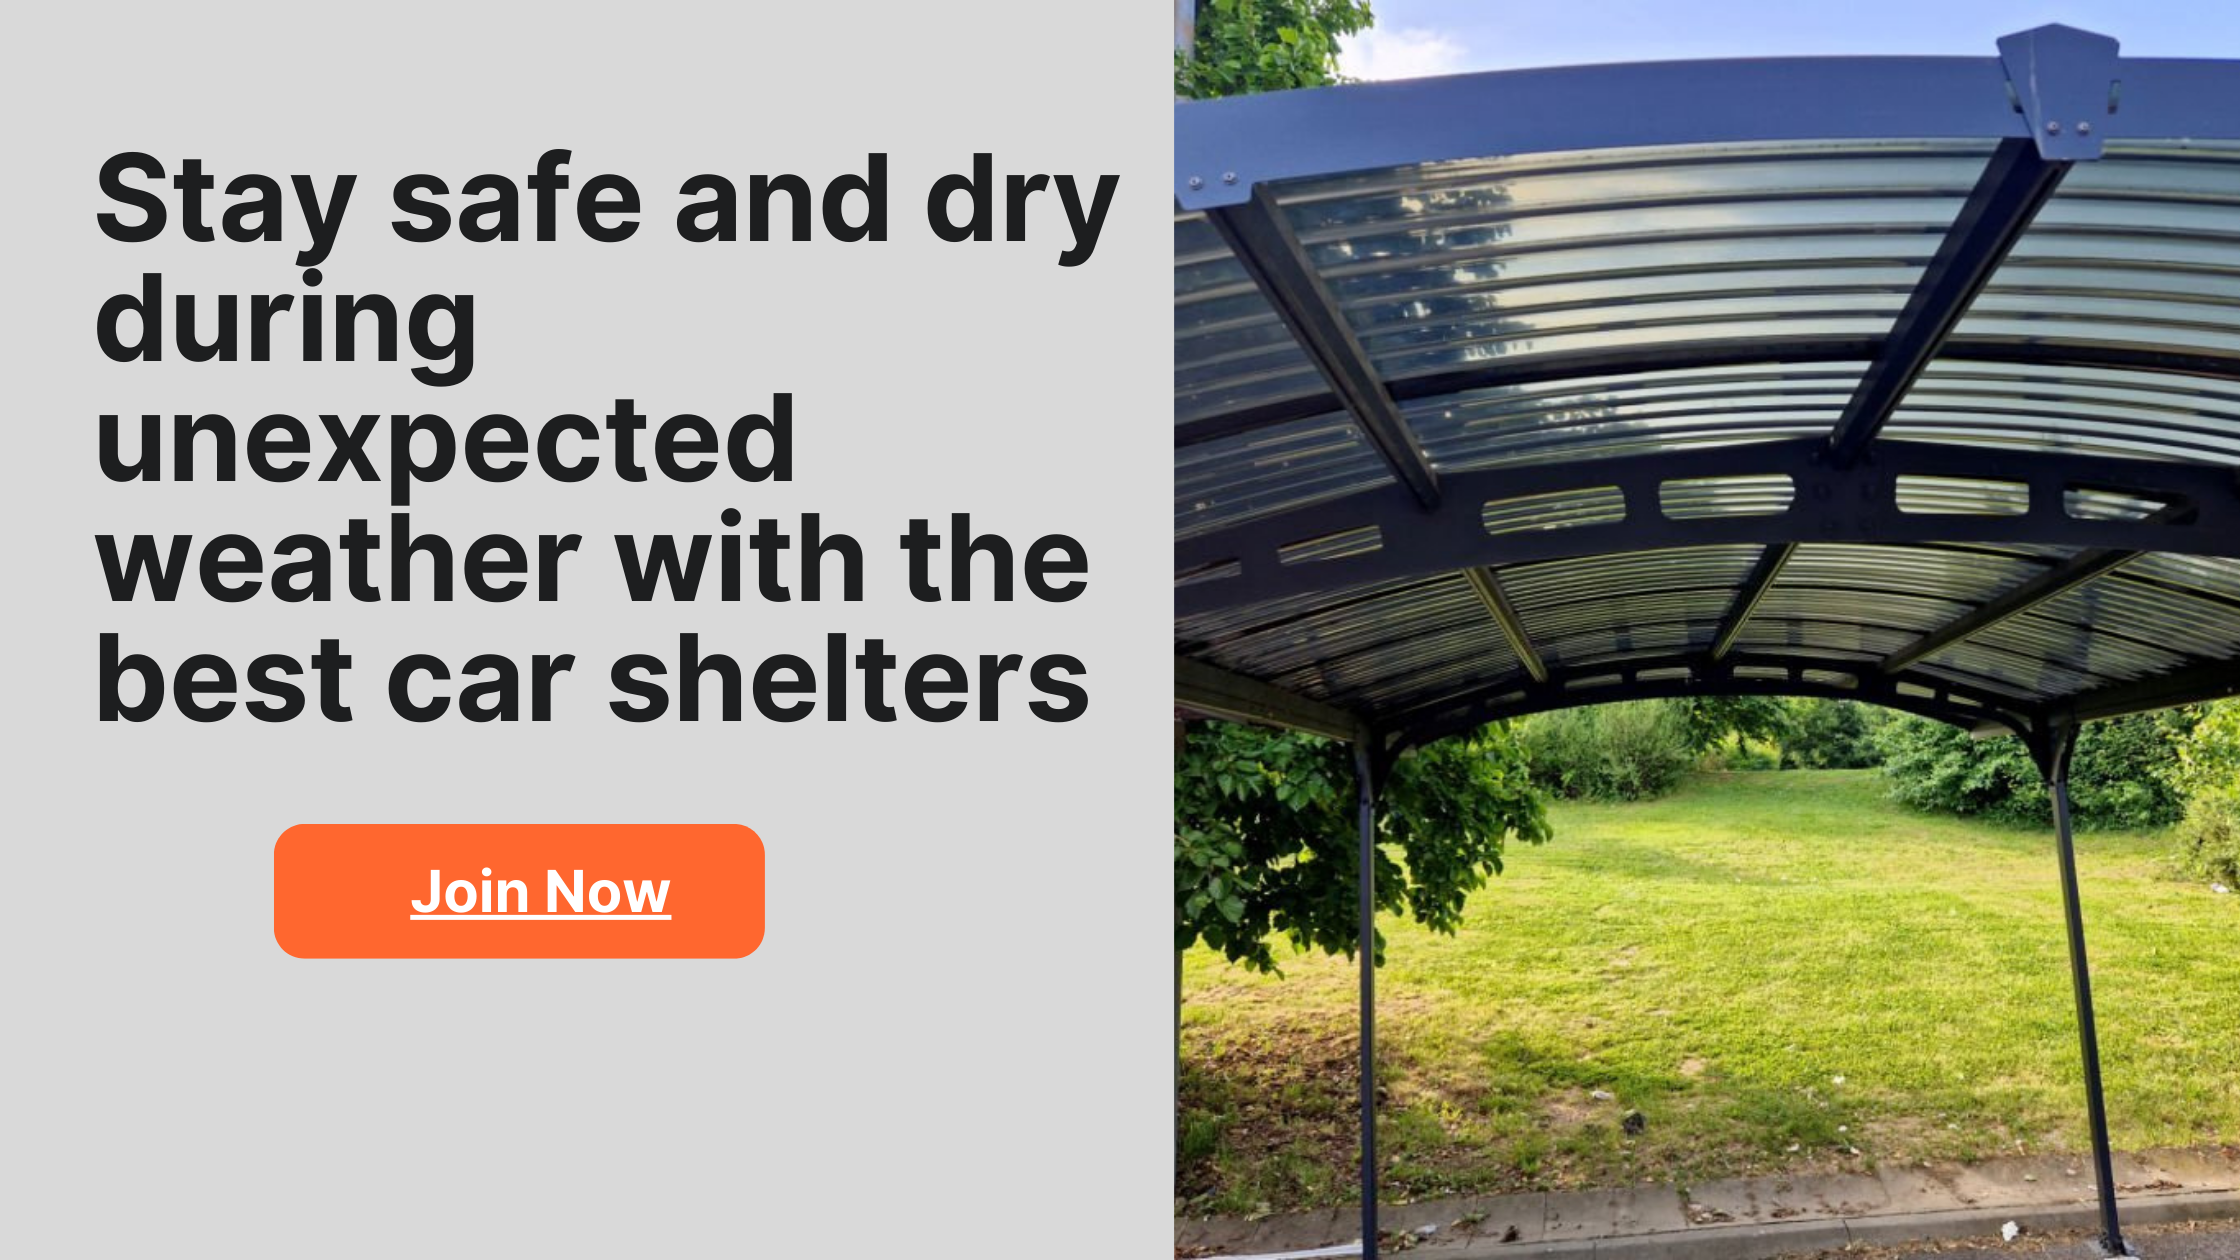 Stay Safe and Dry: Best Car Shelters for Unexpected Weather